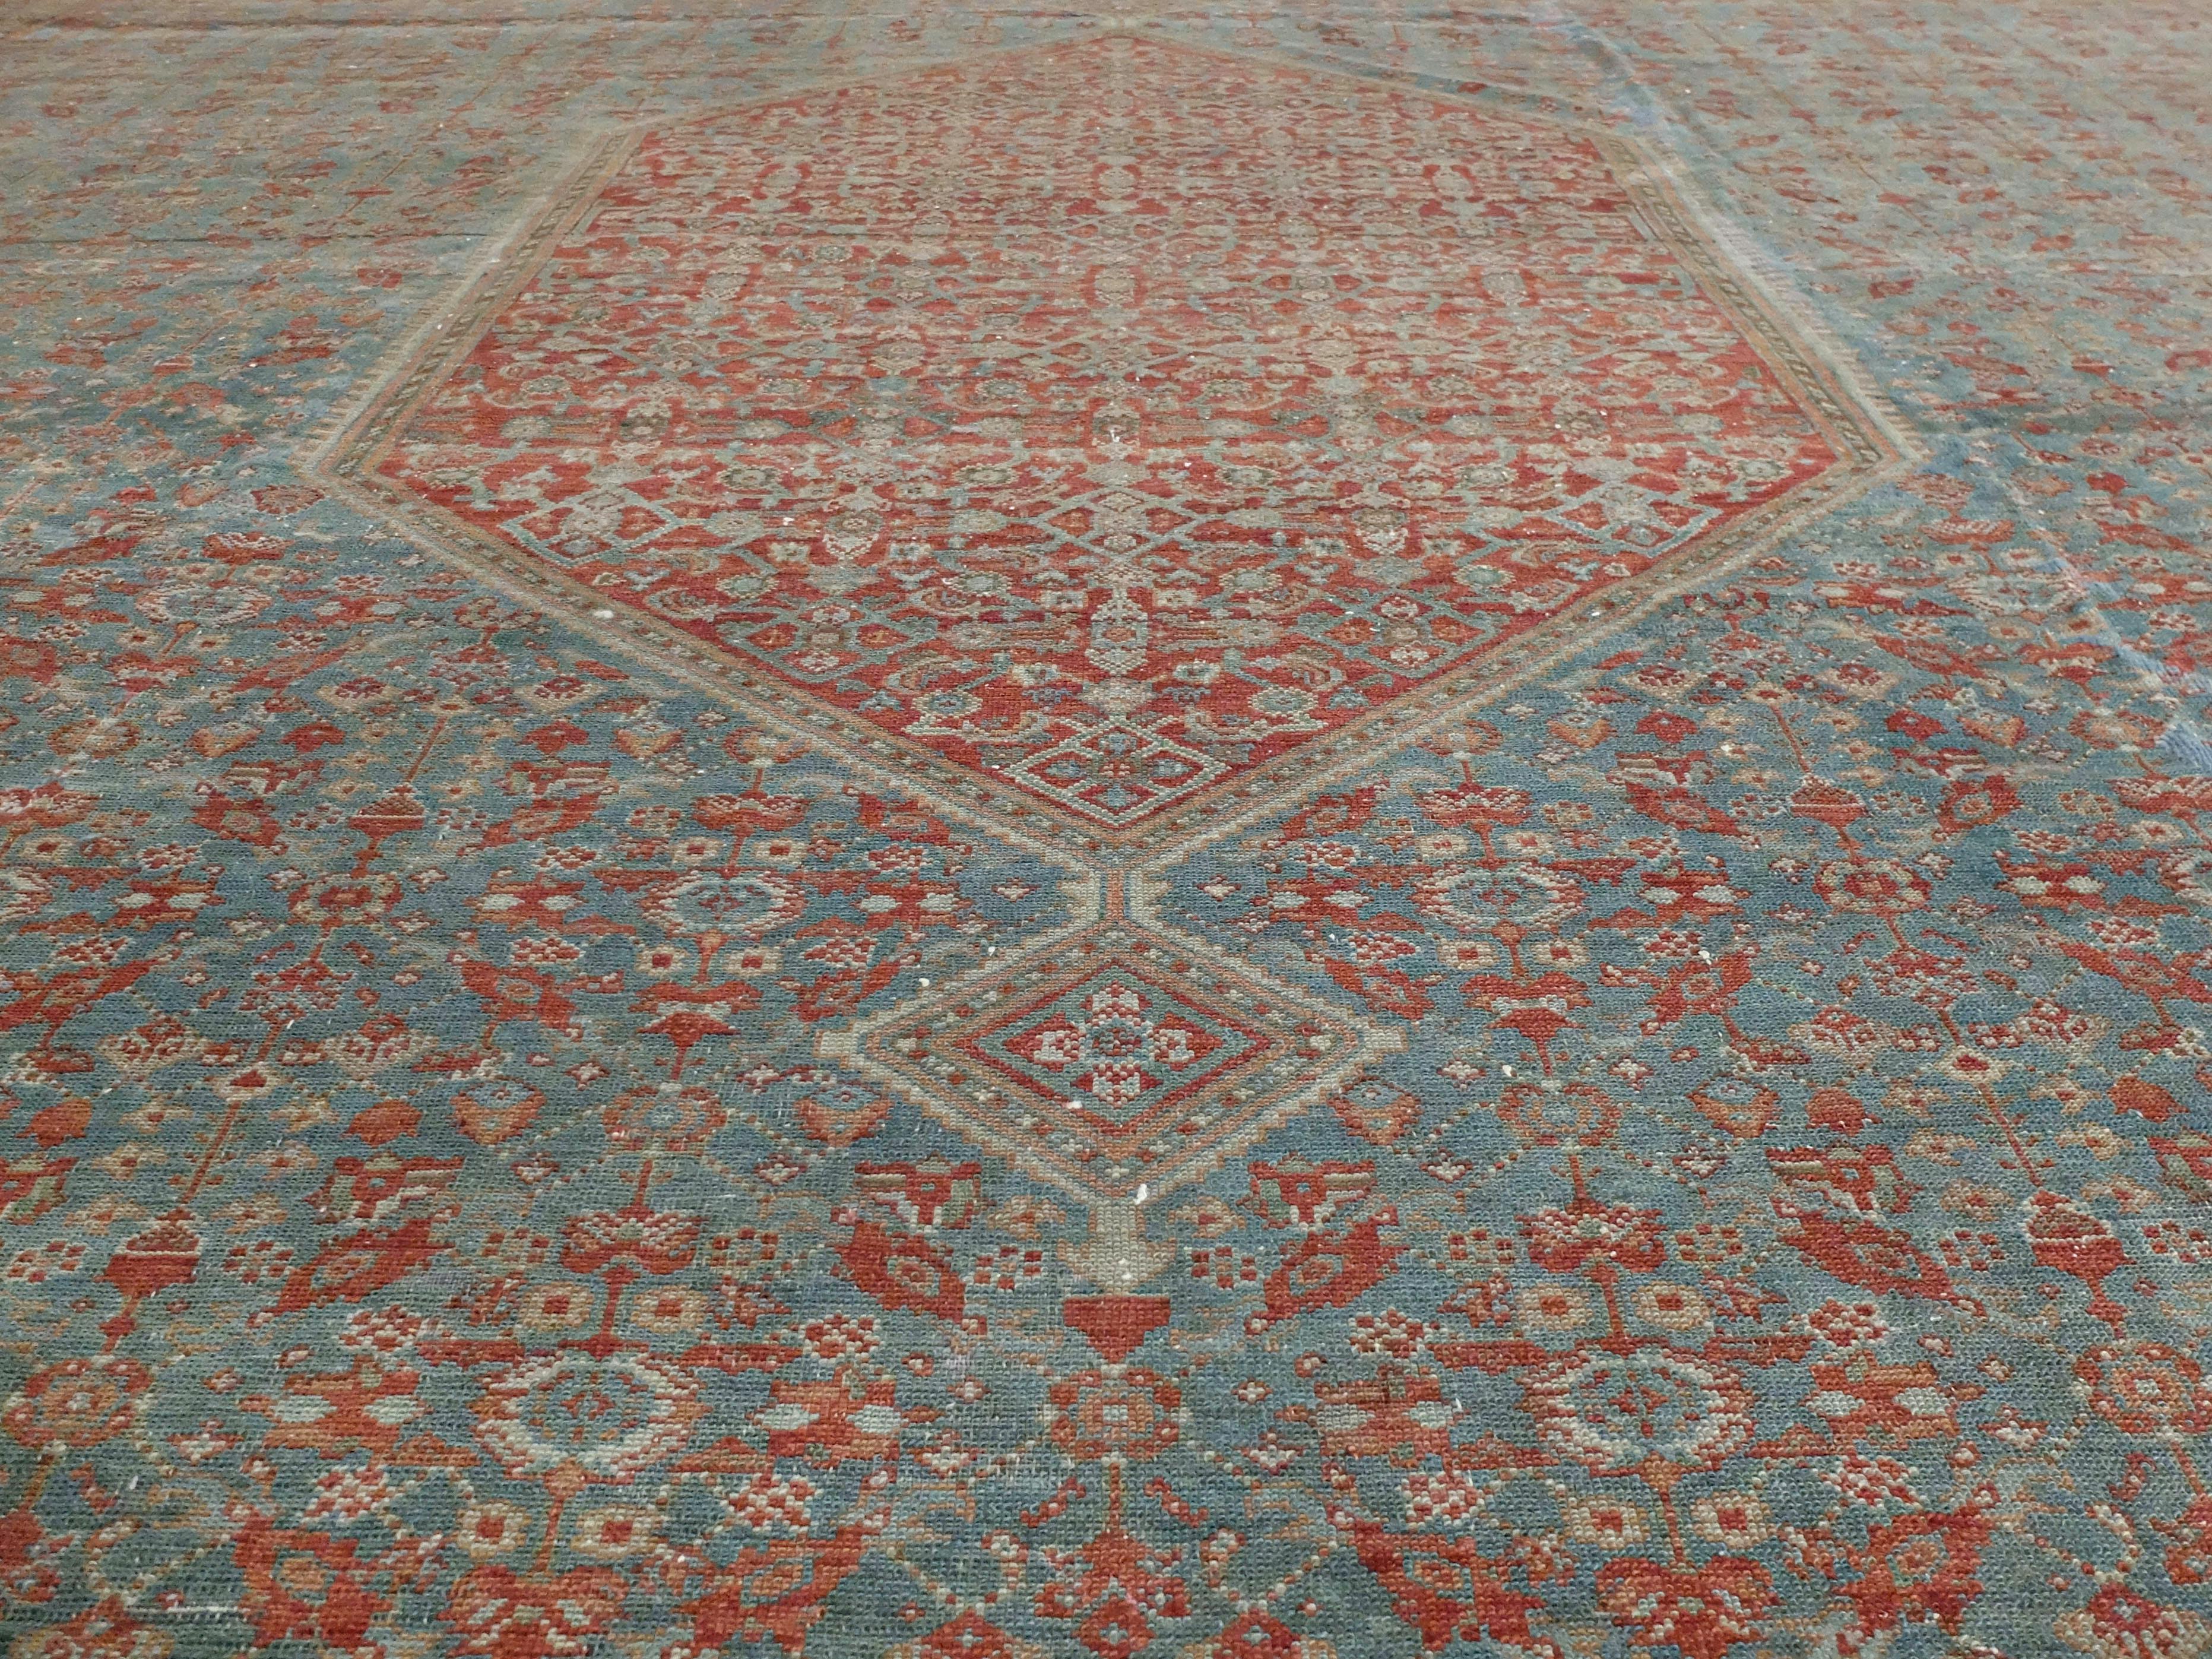 An iconic Tabriz Haji Jalili antique rug made with the highest quality in mind. It has a mimicking small and large diamond which creates its overall structure. Upon closer look, you can see small intricate detail throughout the entire rug. Similar